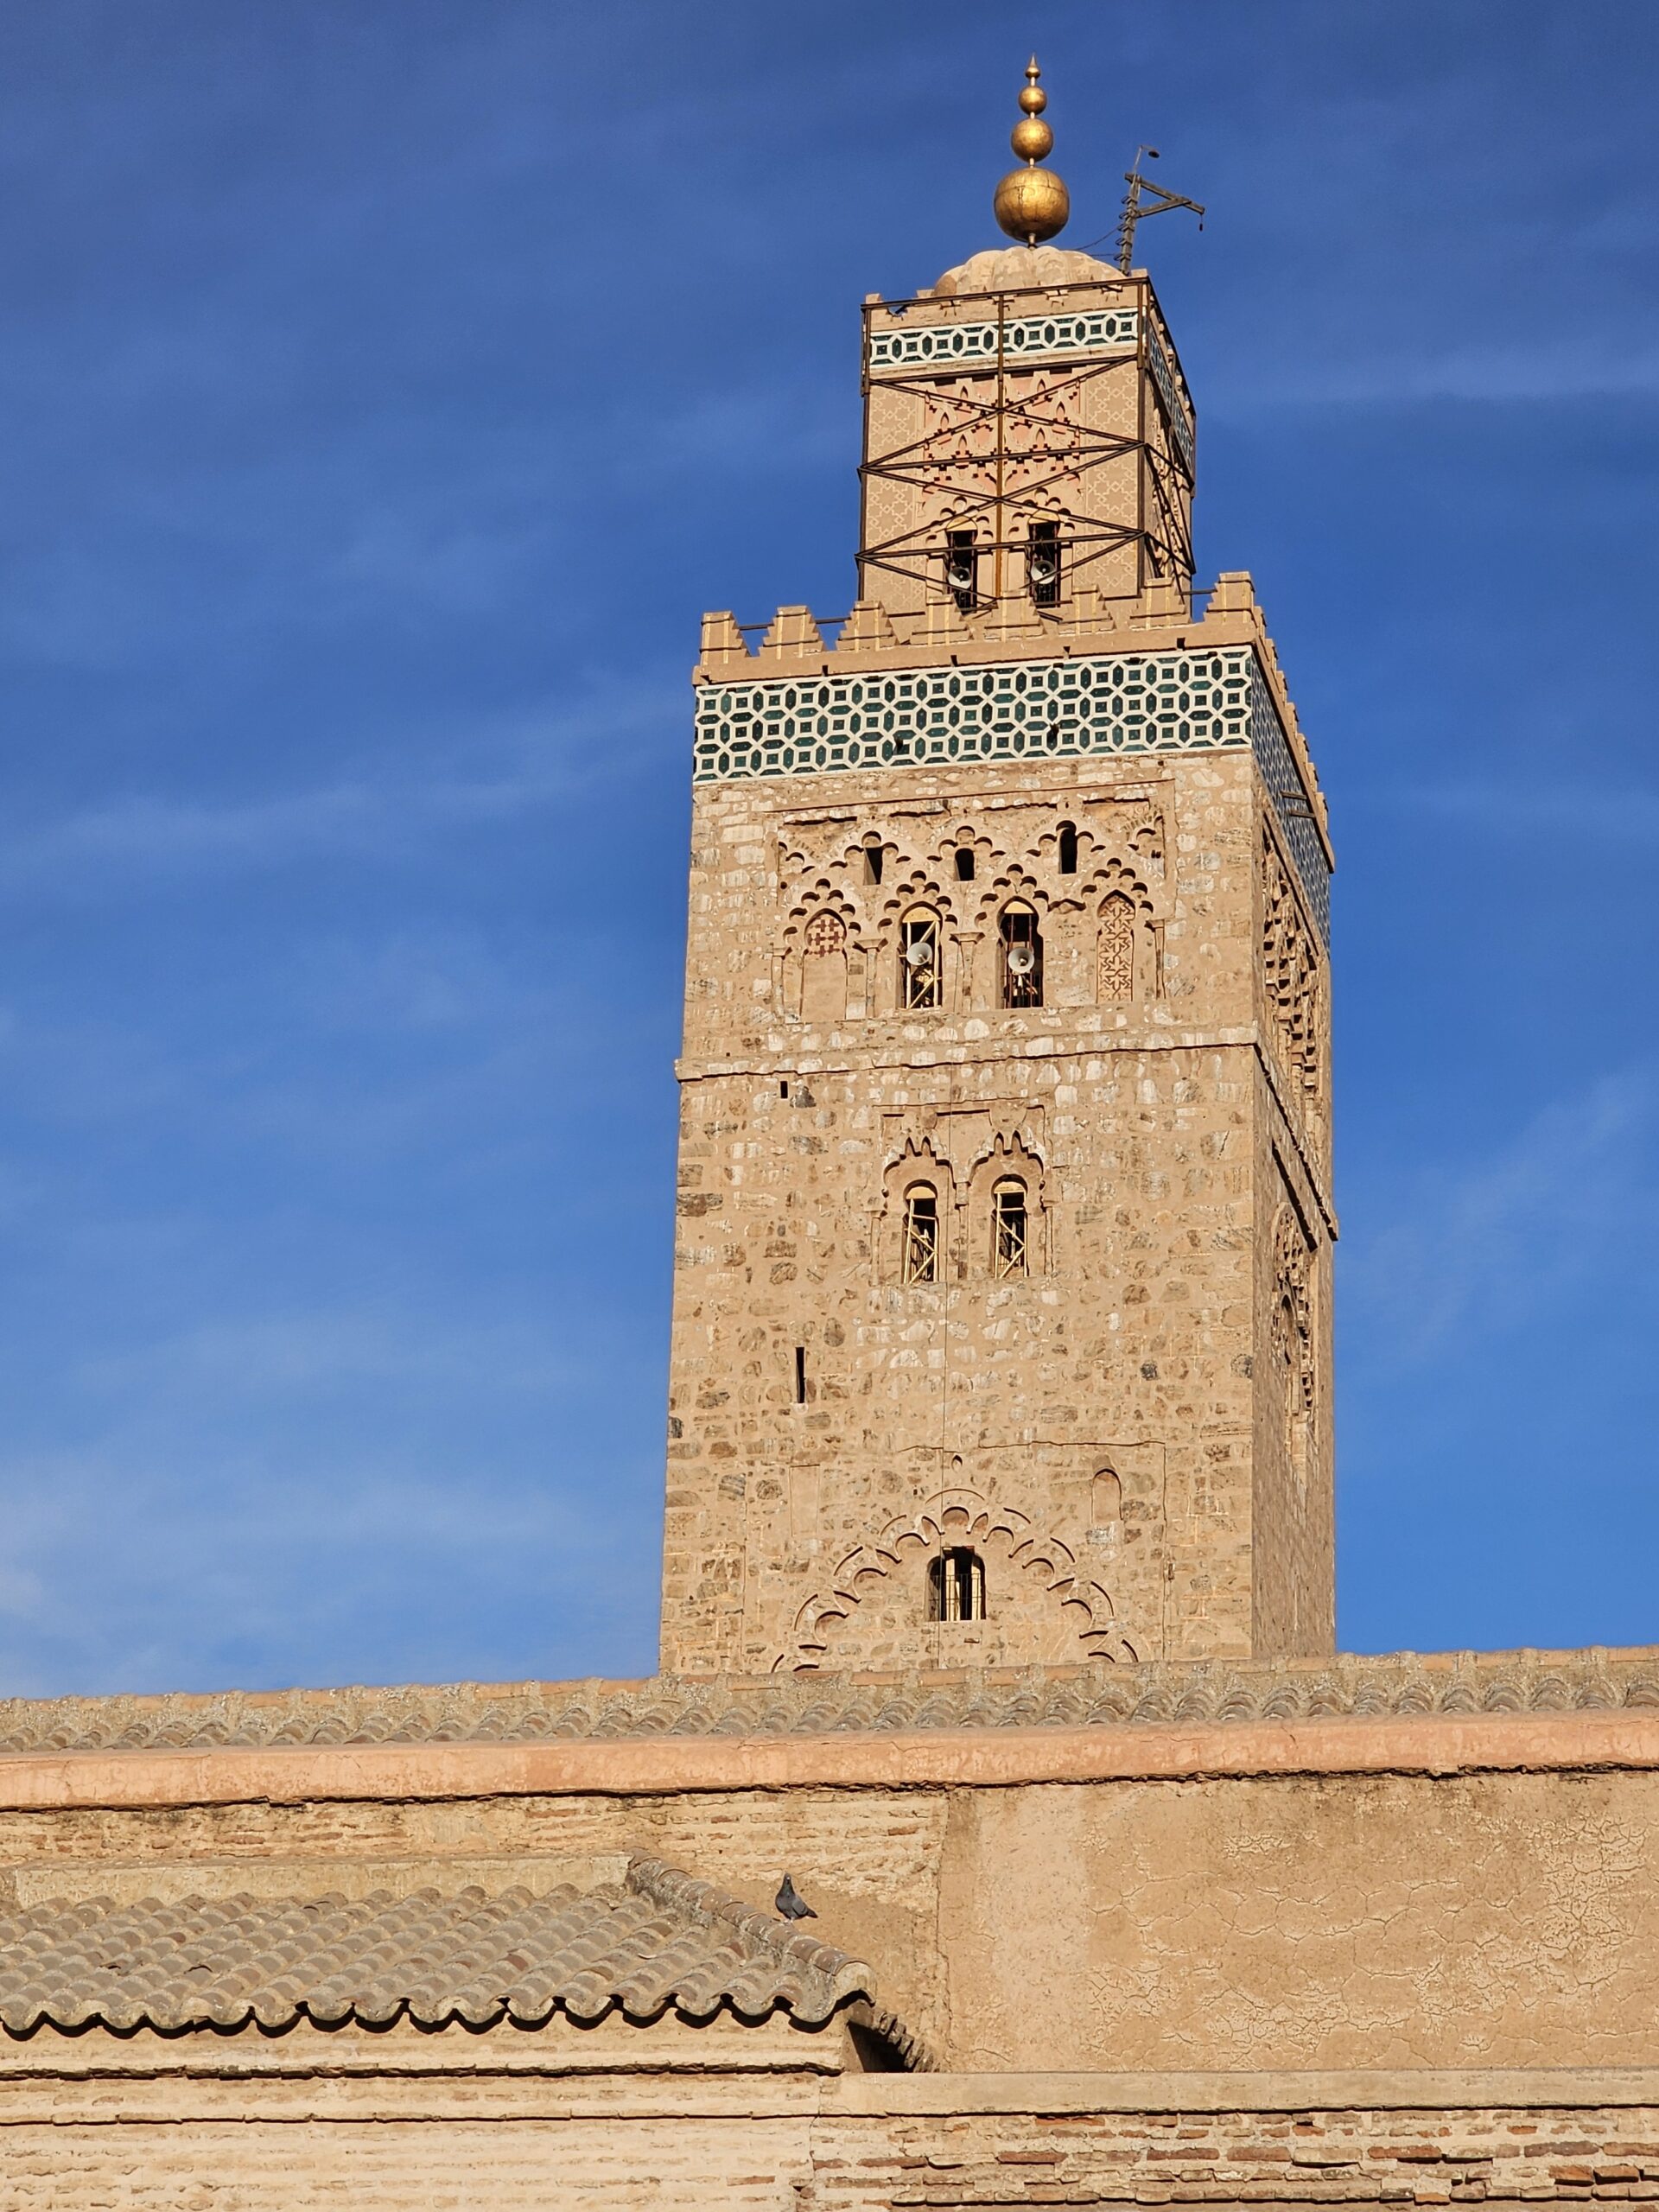 Top of the minaret and front wall of Koutoubia Mosque, Marrakesh. Image by 360onhistory.com